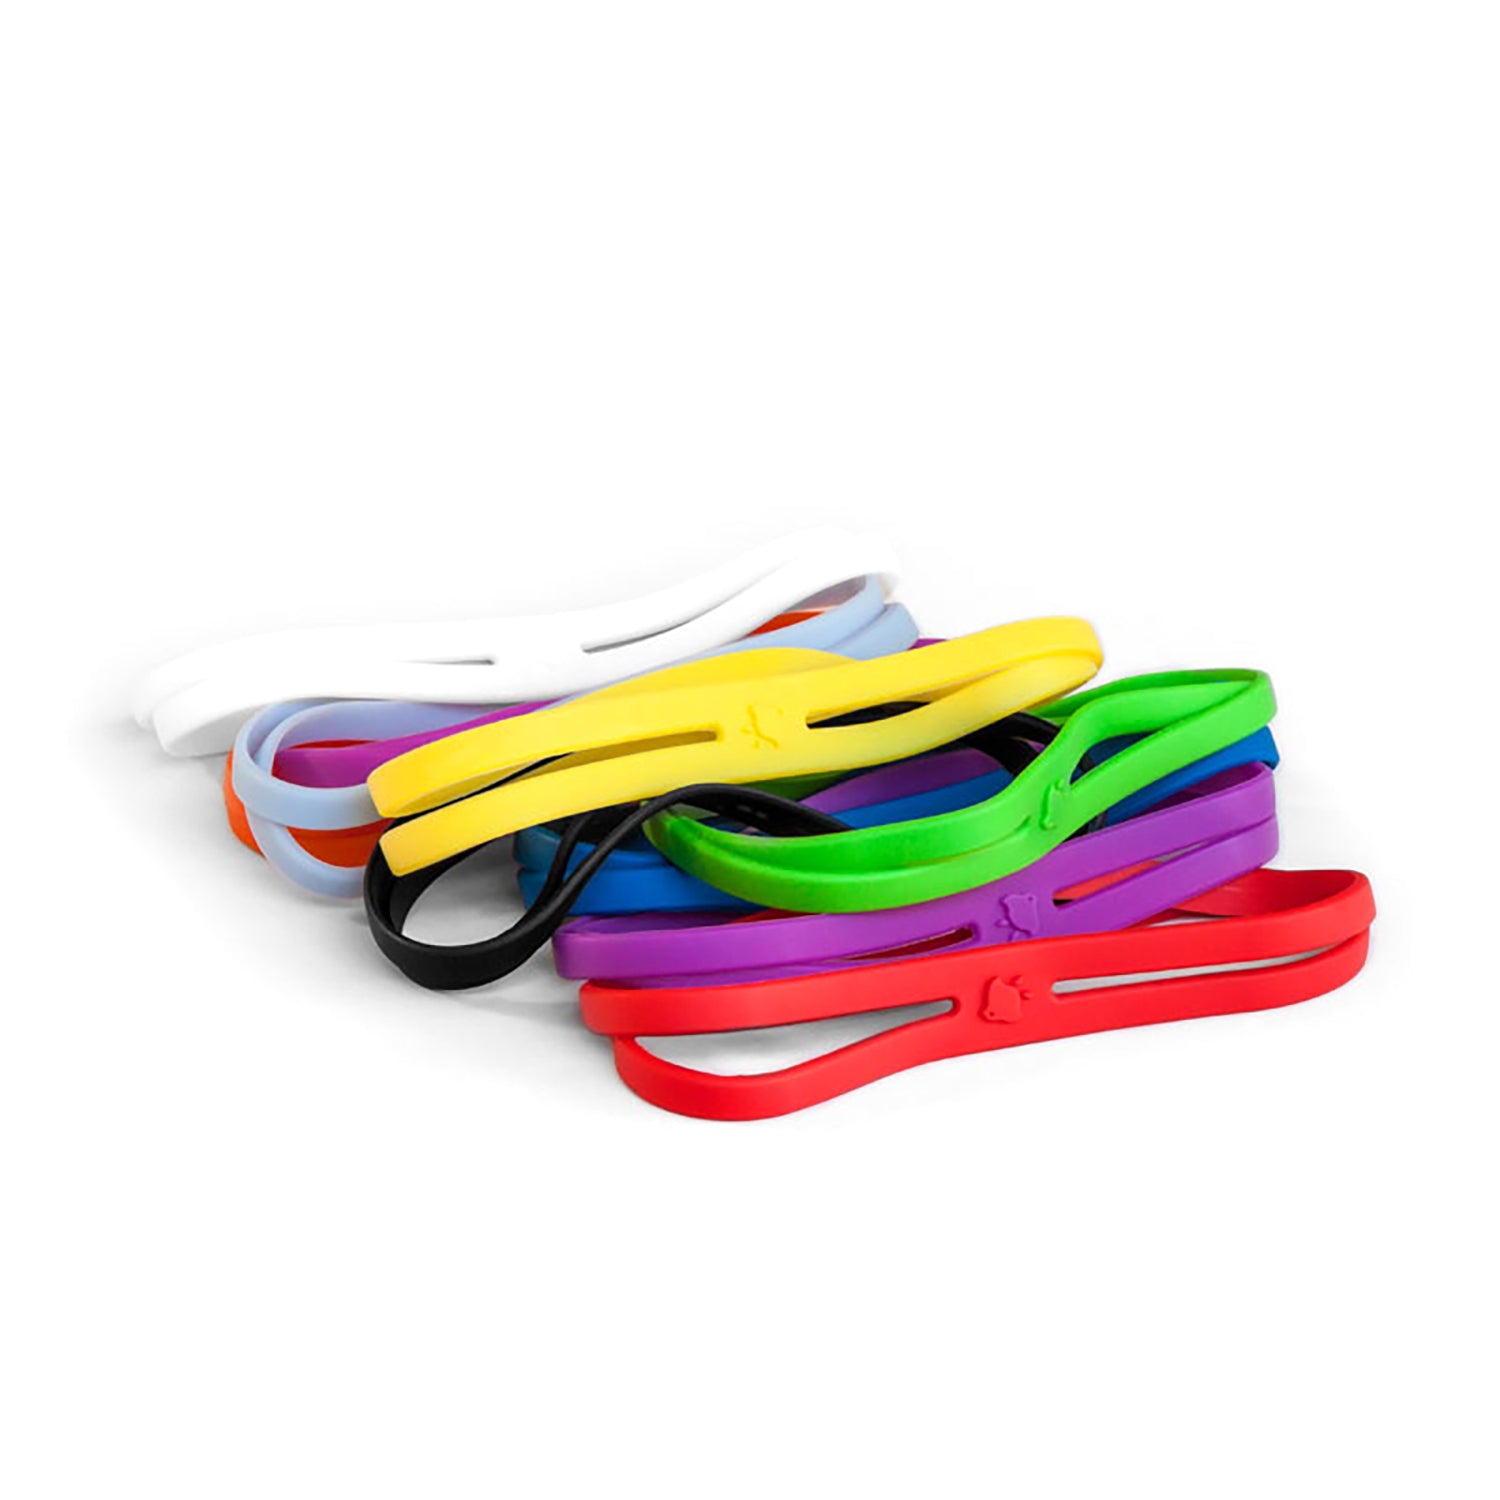 Grifiti Band Joes 6 Inch Silicone Cross Bands H X Style for Notebooks Boxes Cooking Wrapping - Grifiti